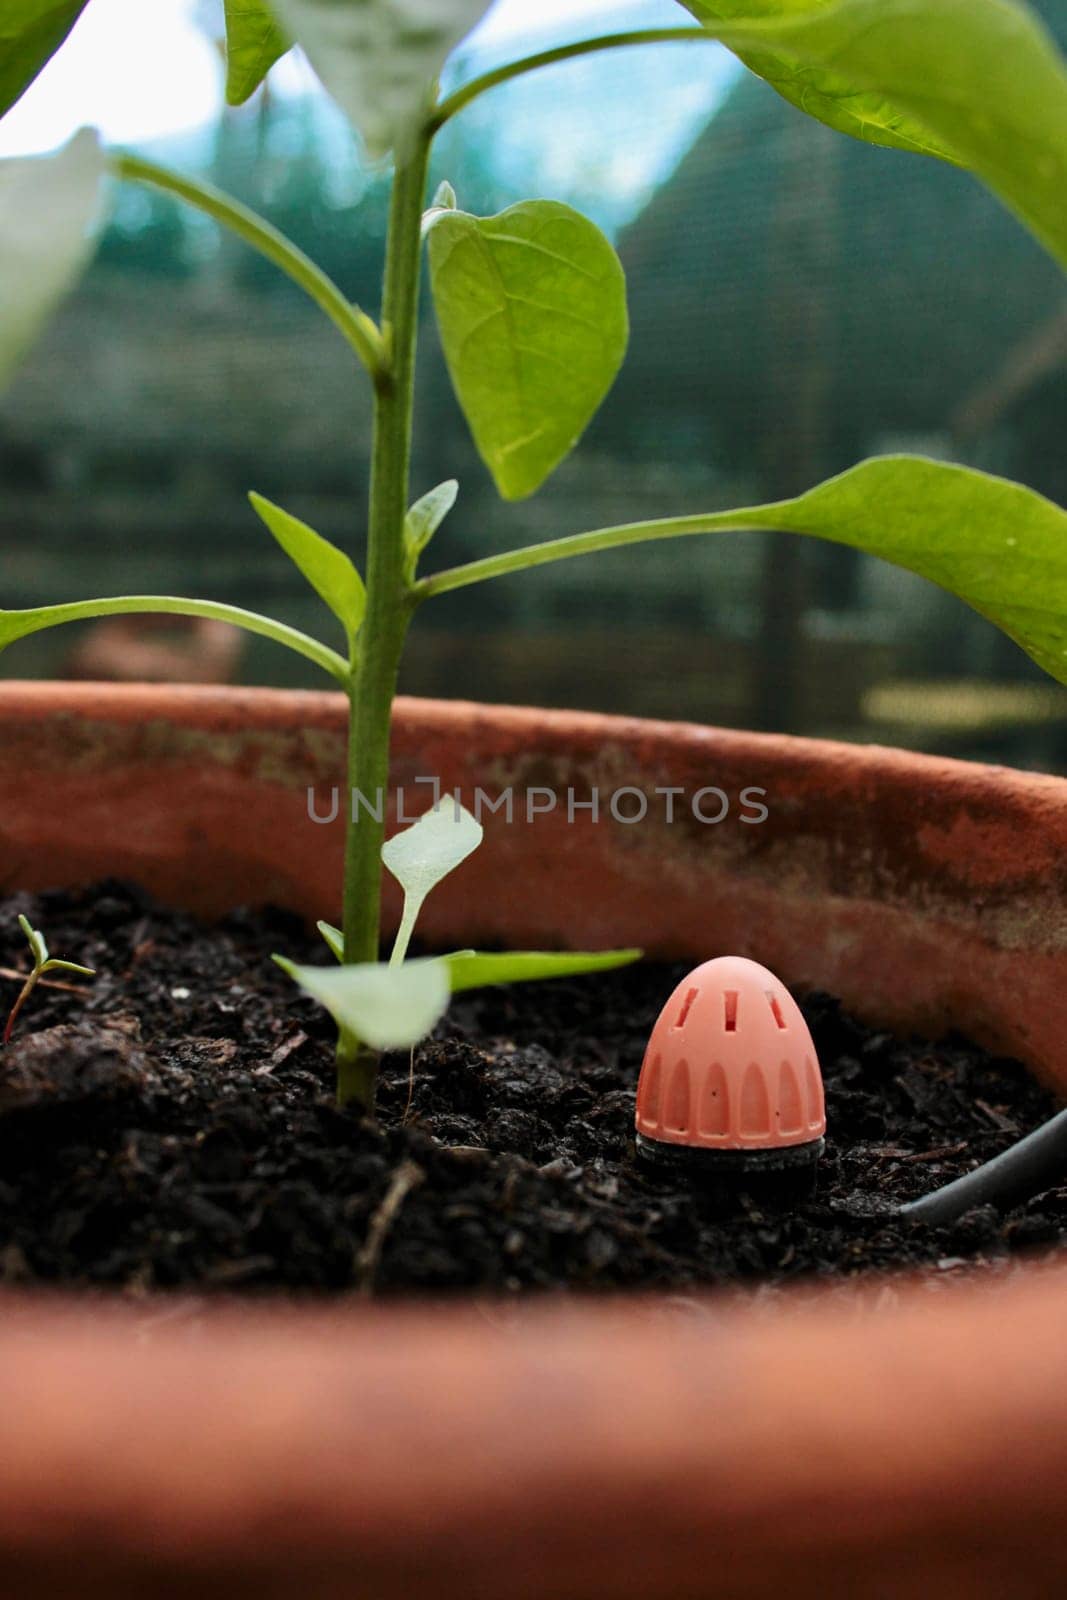 A pepper seedling grows in the soil in a pot and a water sprayer is nearby by MilaLazo